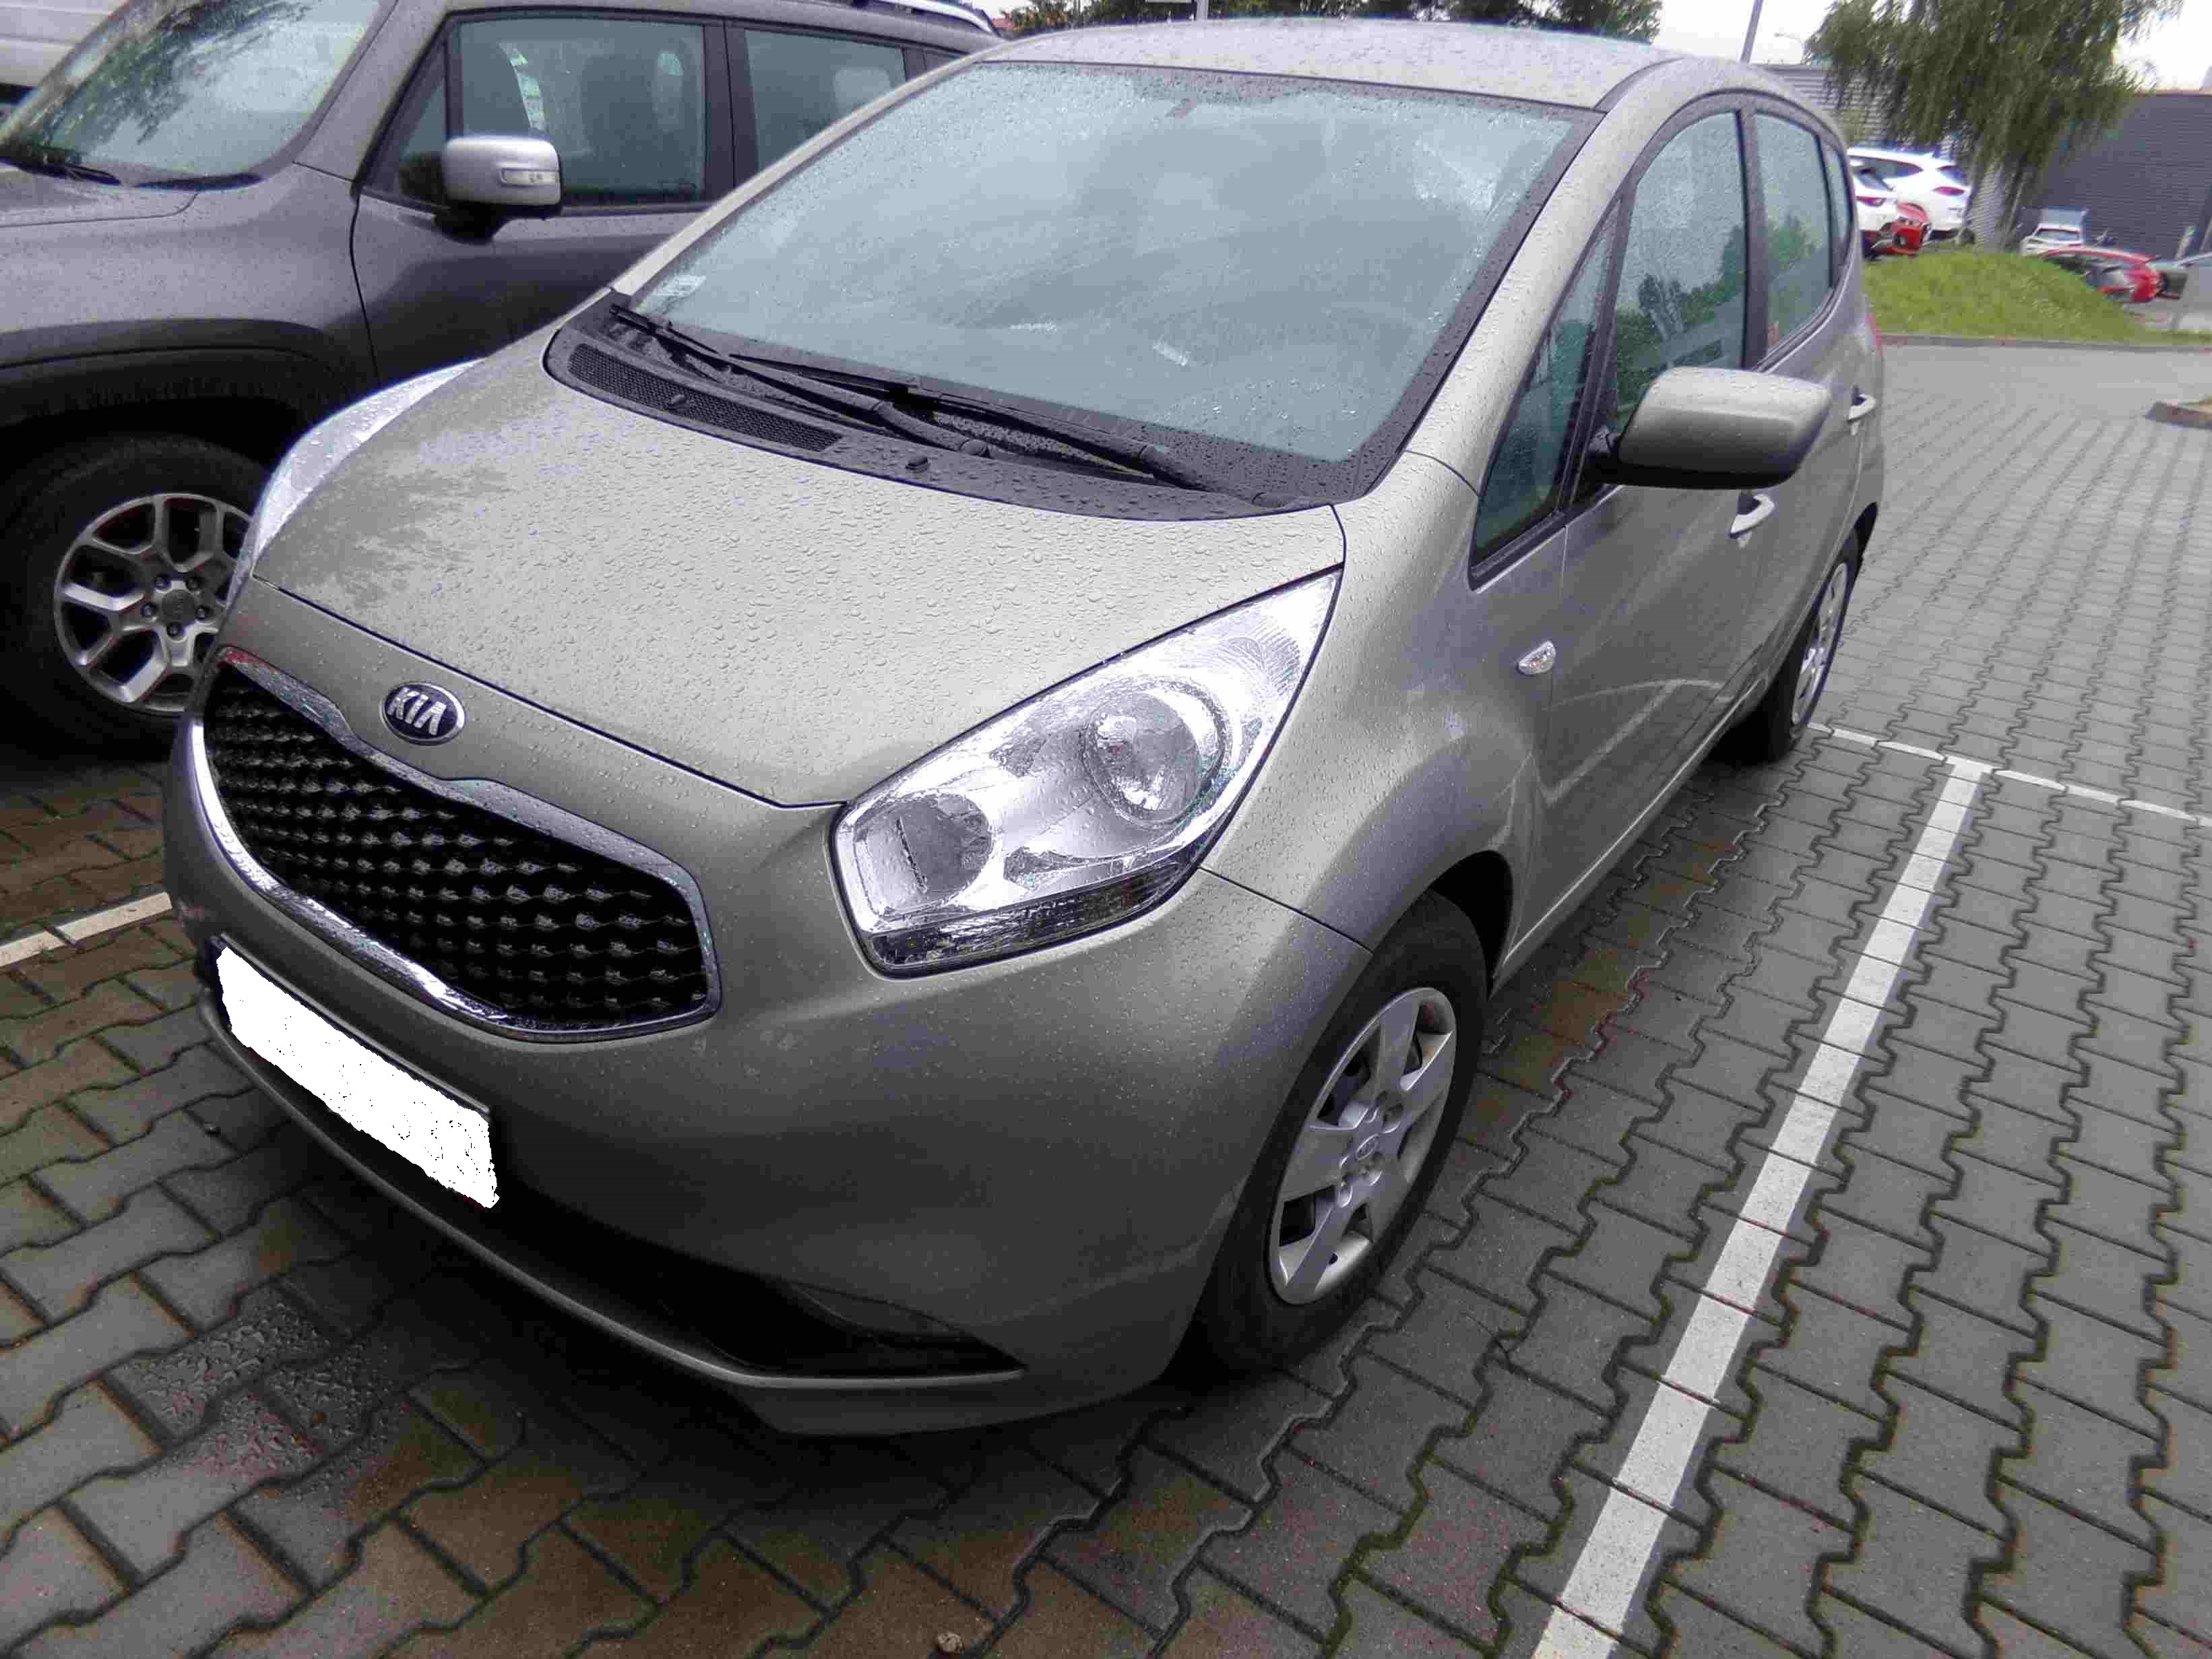 Kia Venga (20092019) Where is VIN Number Find Chassis